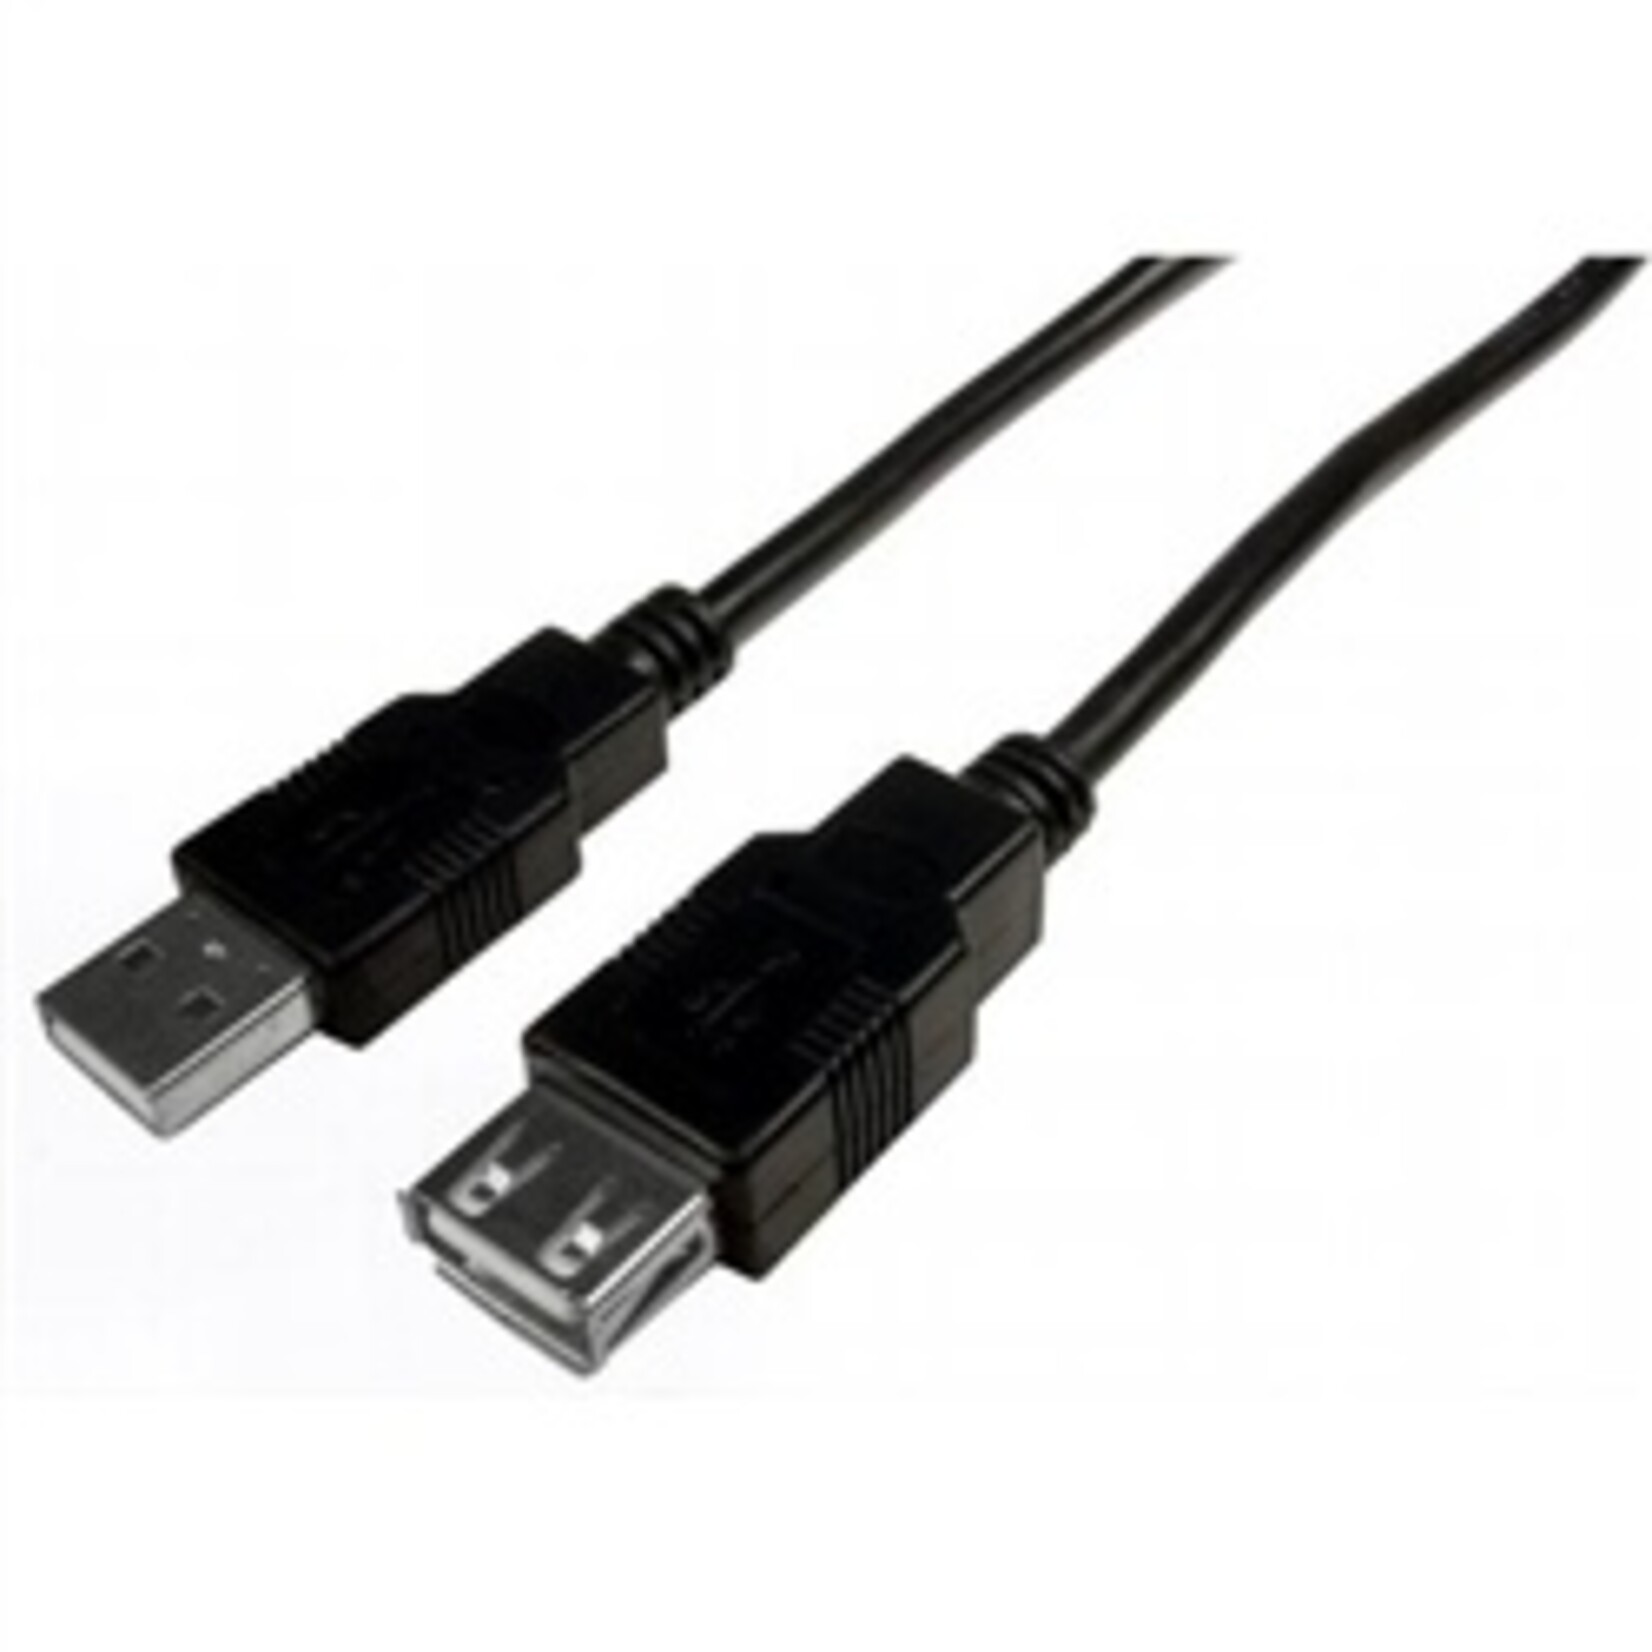 10' USB 2.0 M - A F Ext Cable